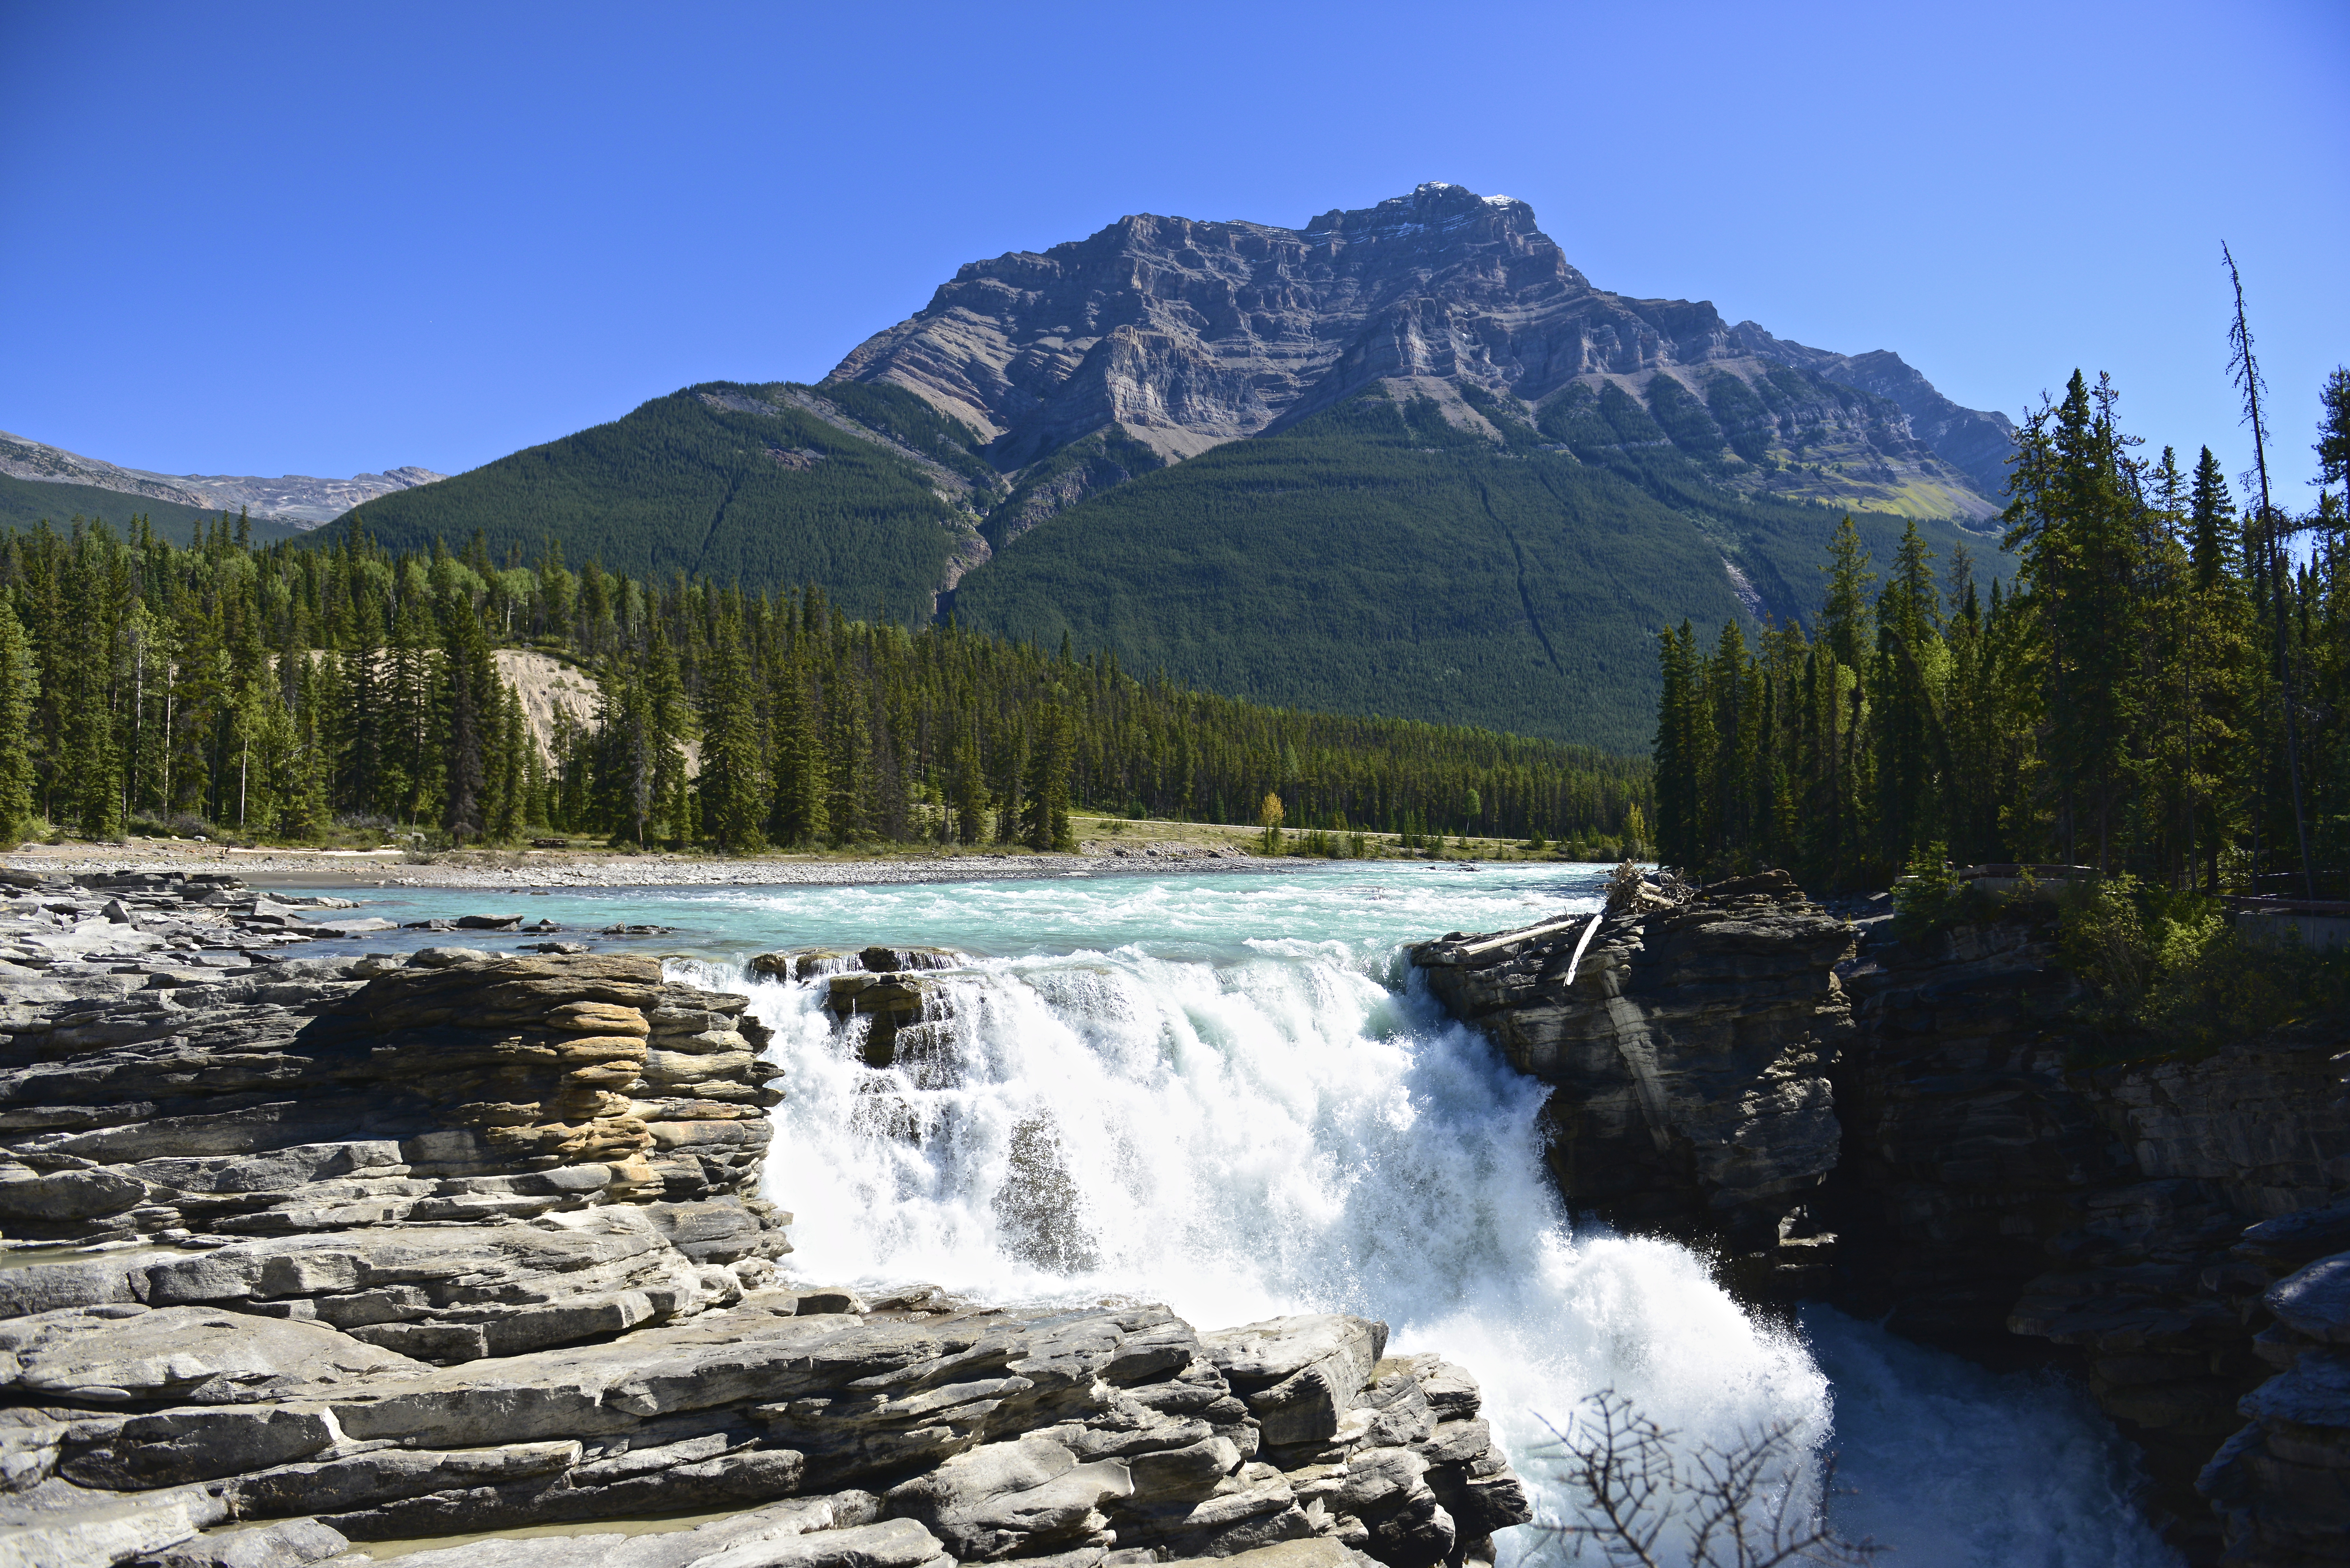 Athabasca Falls Waterfall Jasper National Park Canada River Forest Rock Mountain Nature 7360x4912